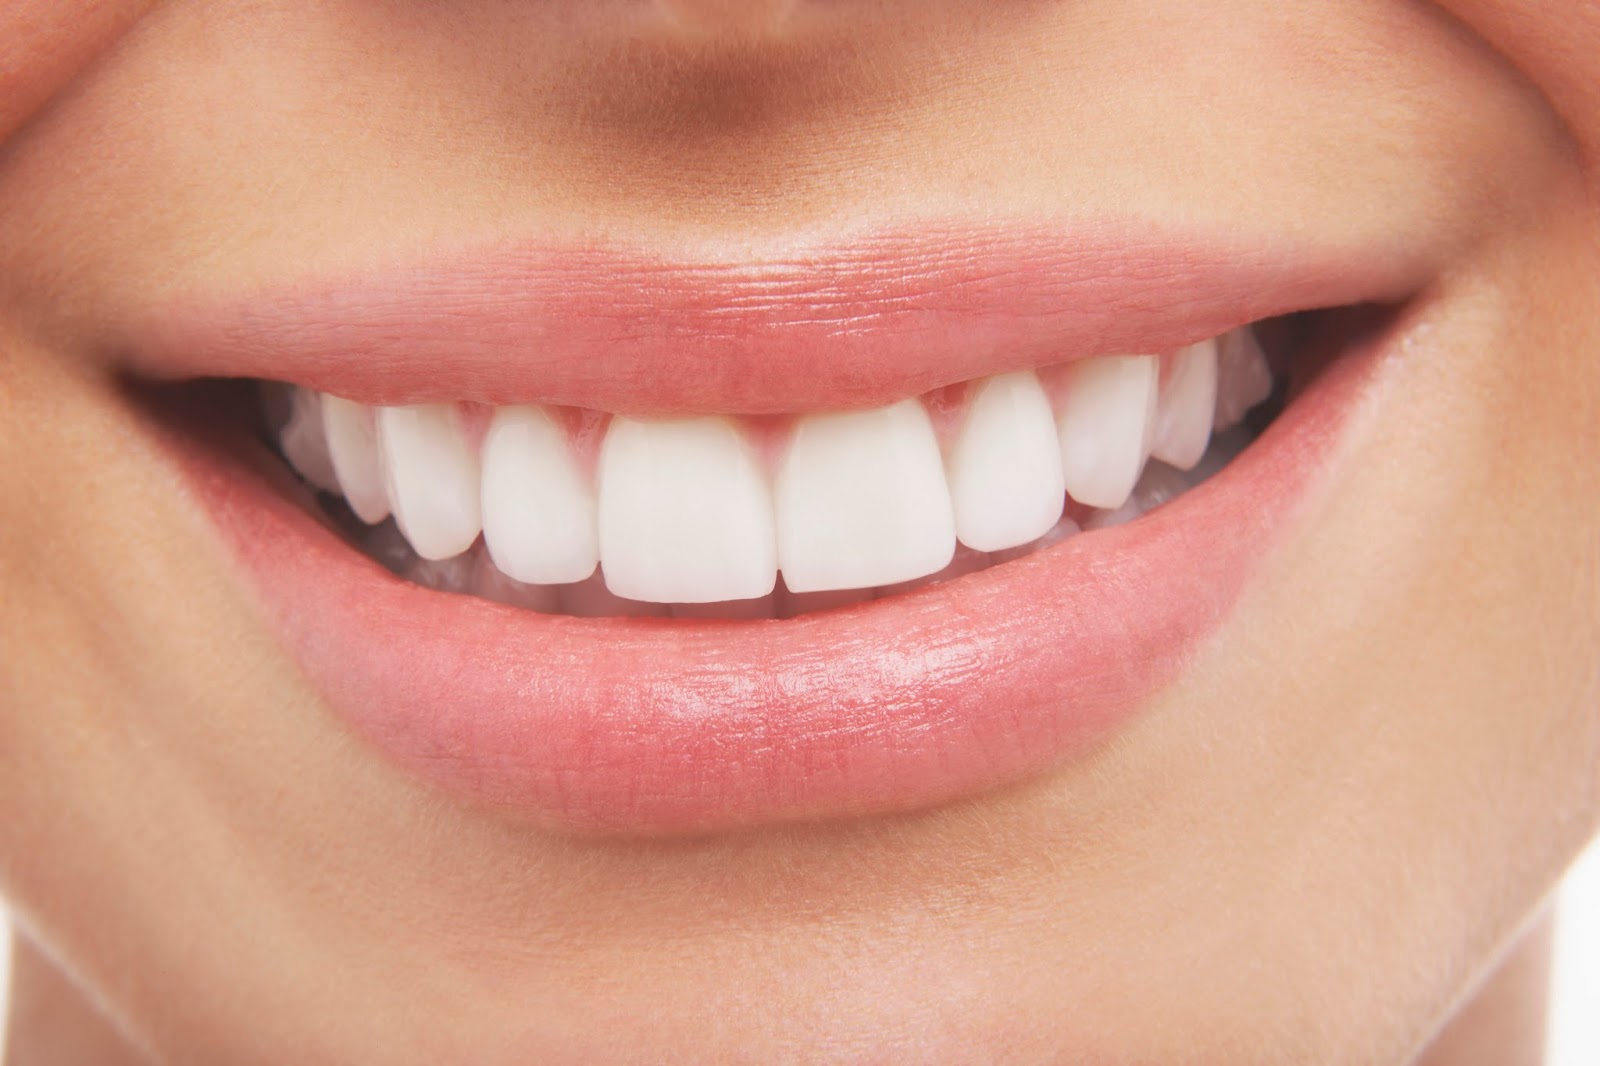 What Are Teeth Made Of? and 10 other facts about teeth